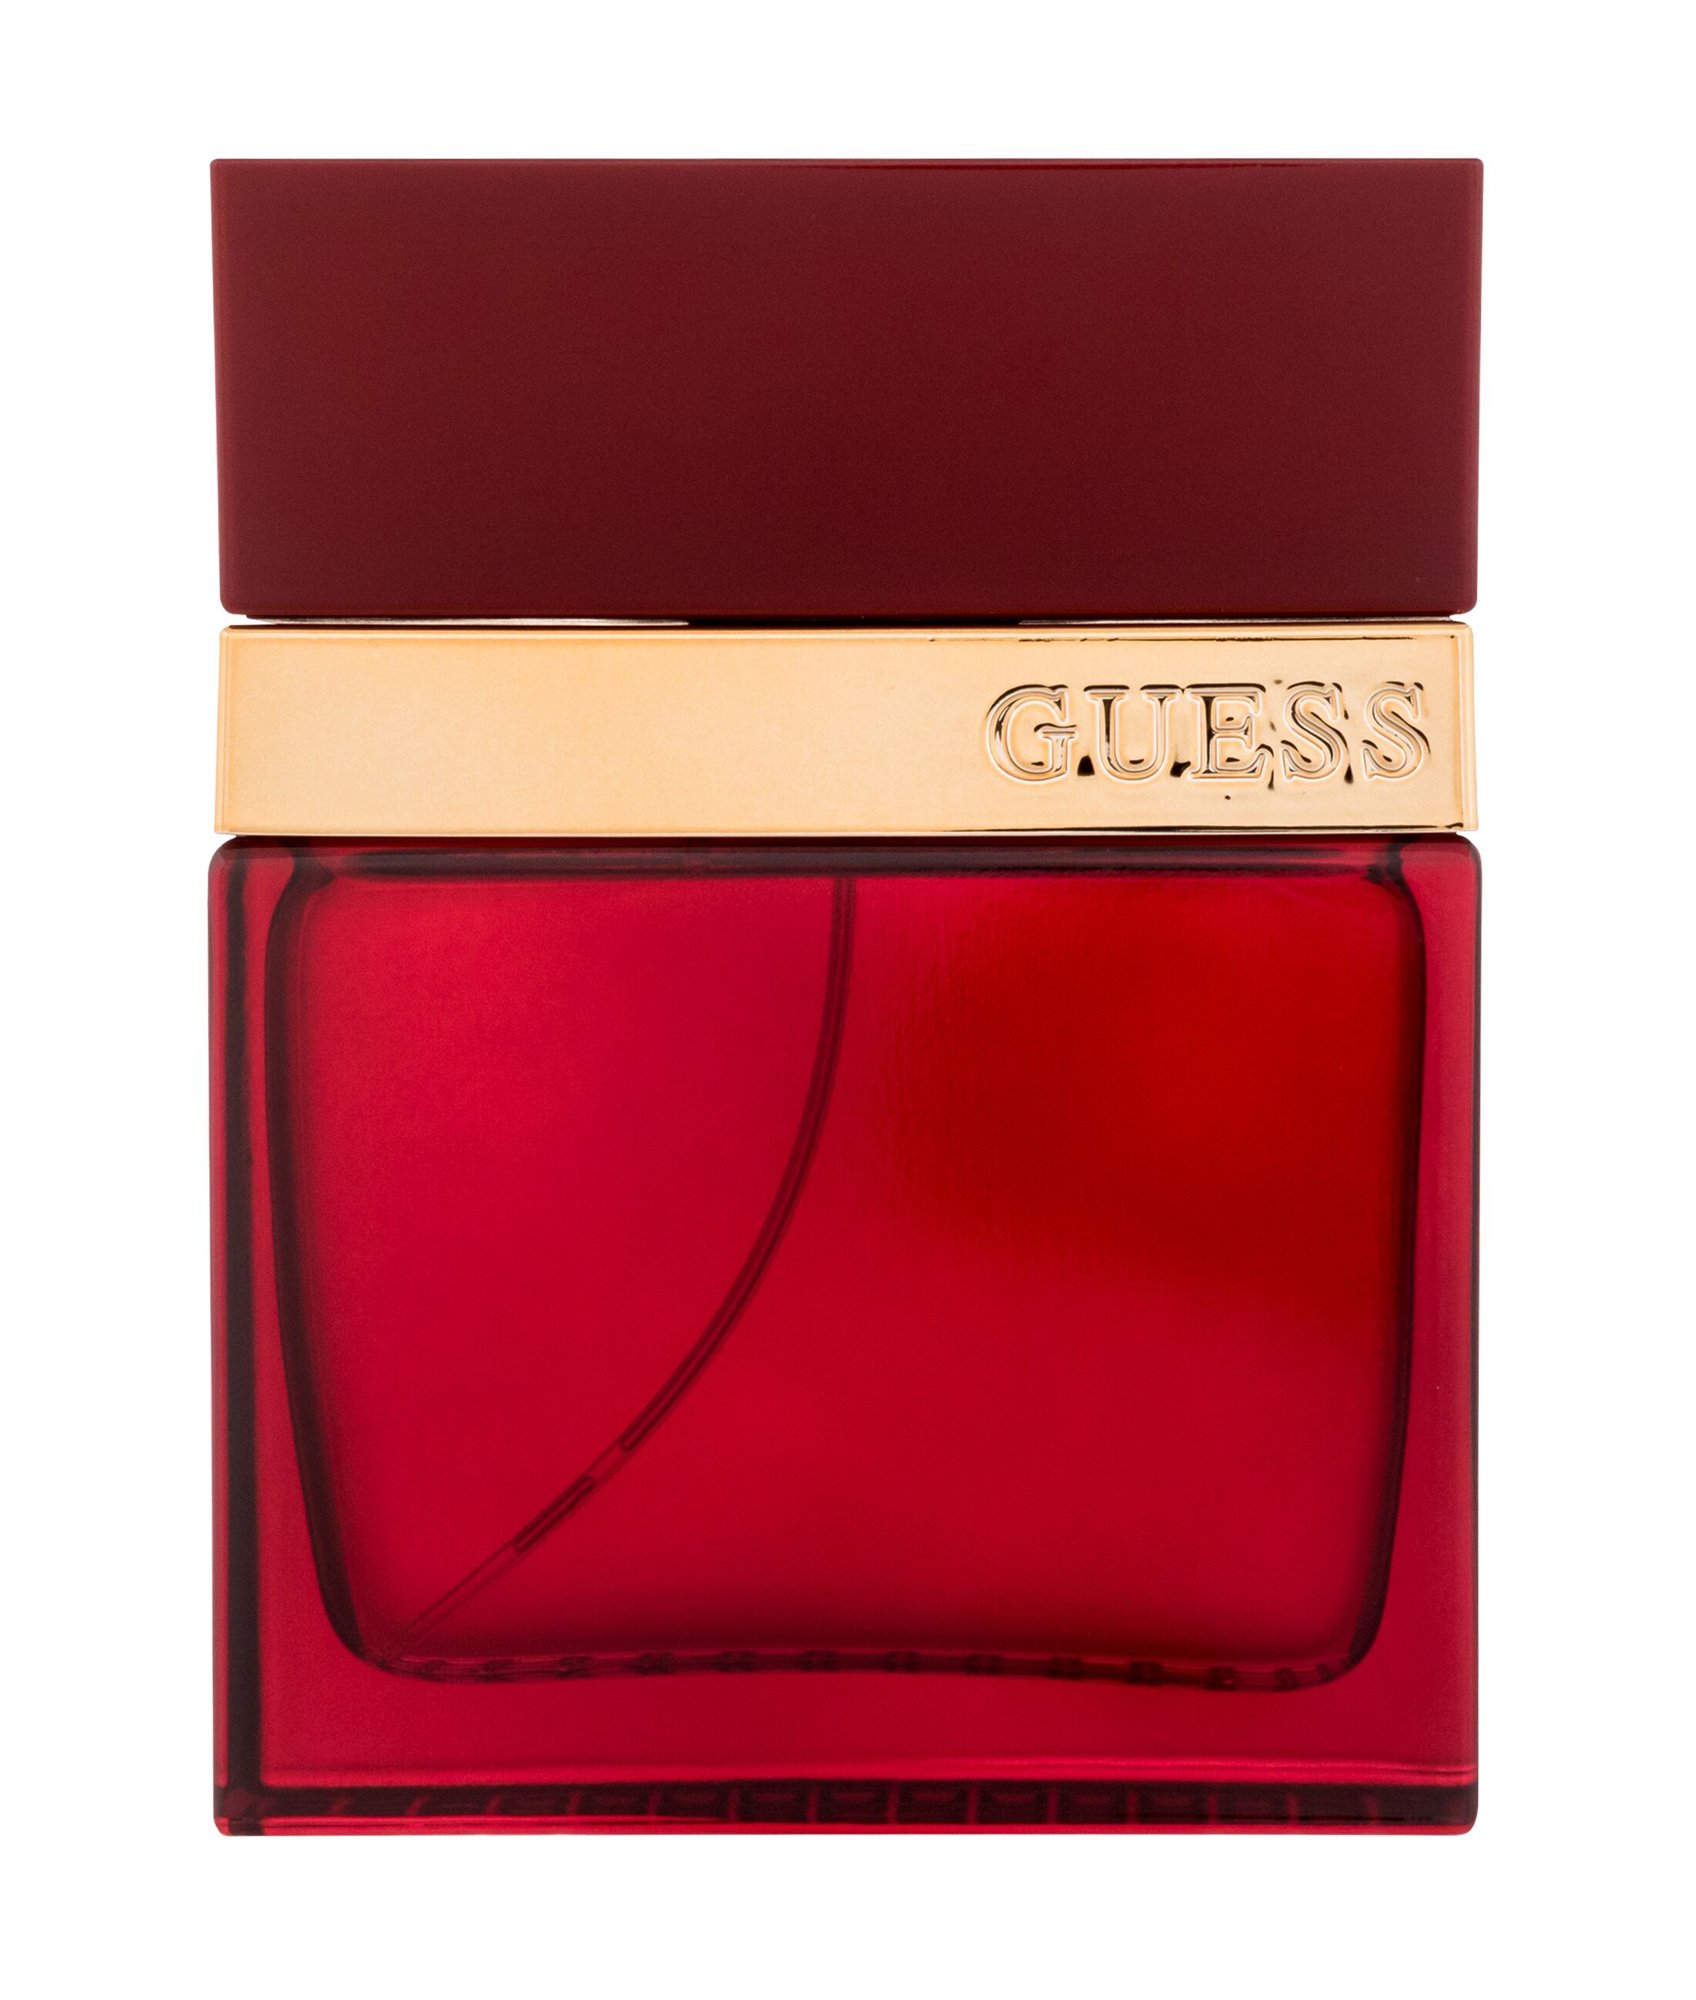 Guess Seductive Homme Red Kvepalai Vyrams